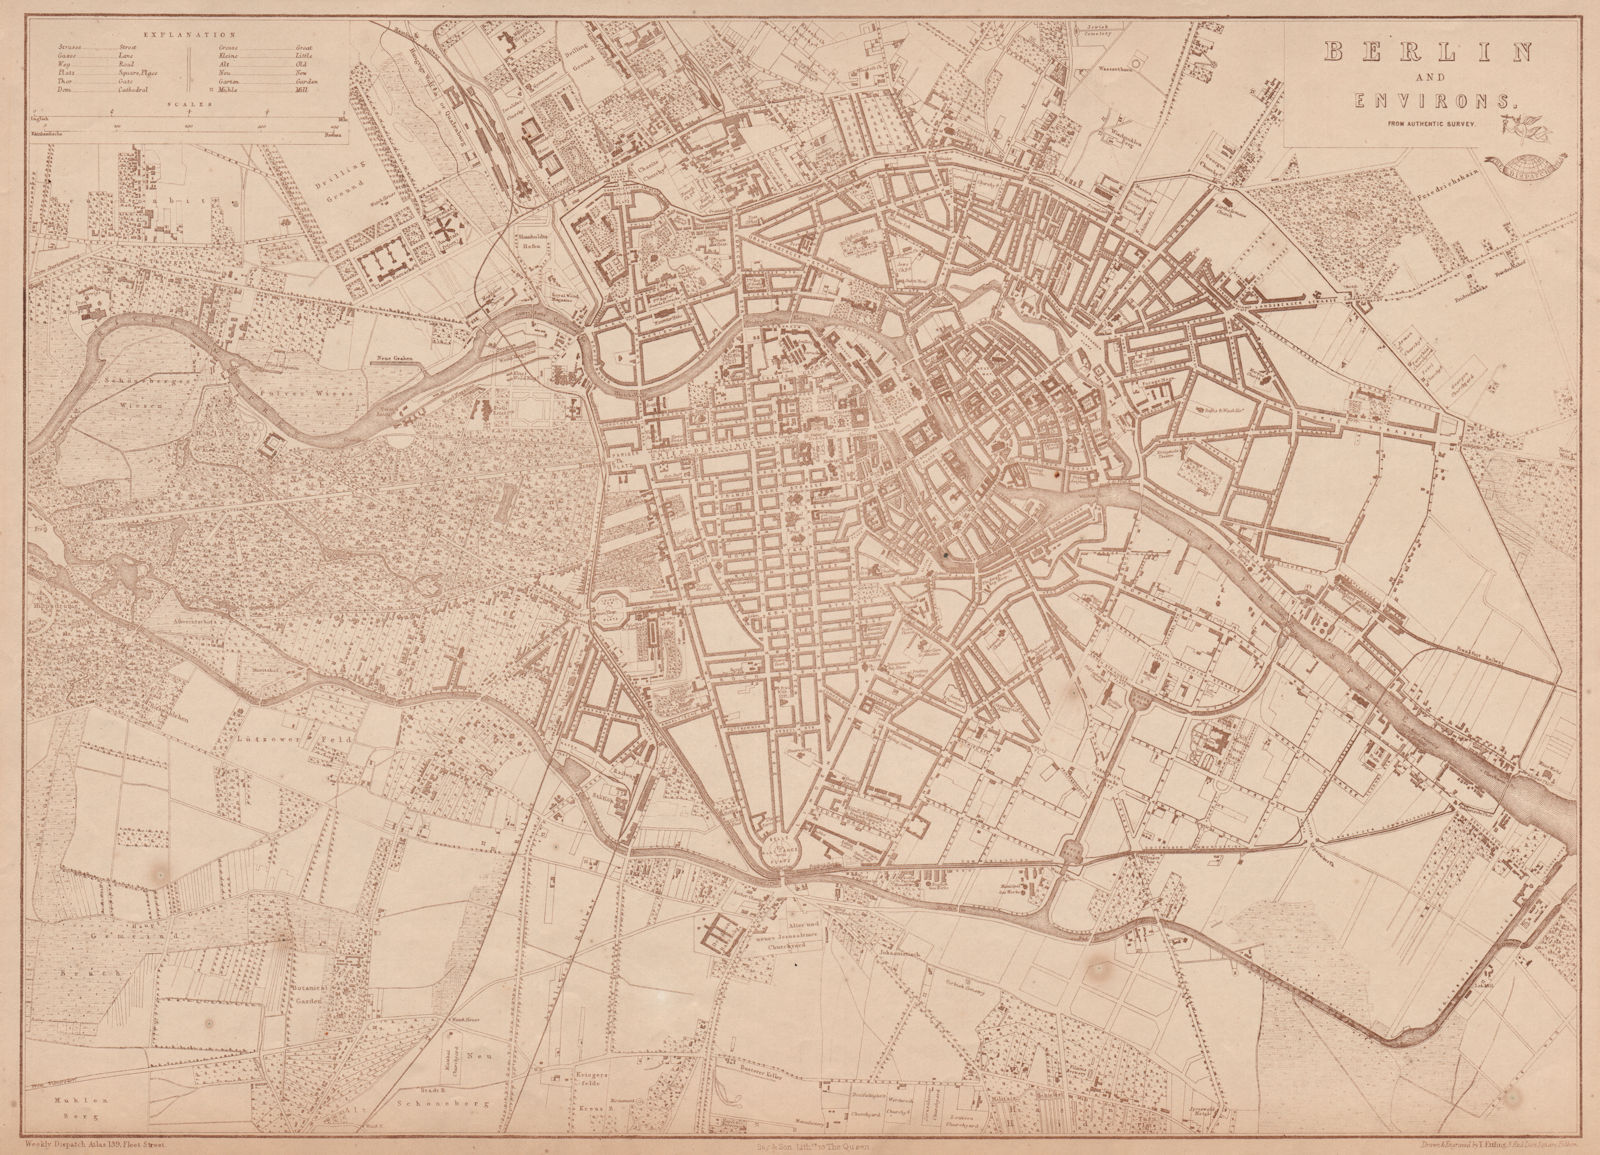 Associate Product BERLIN. Large town/city plan by T. ETTLING for the Dispatch Atlas 1863 old map